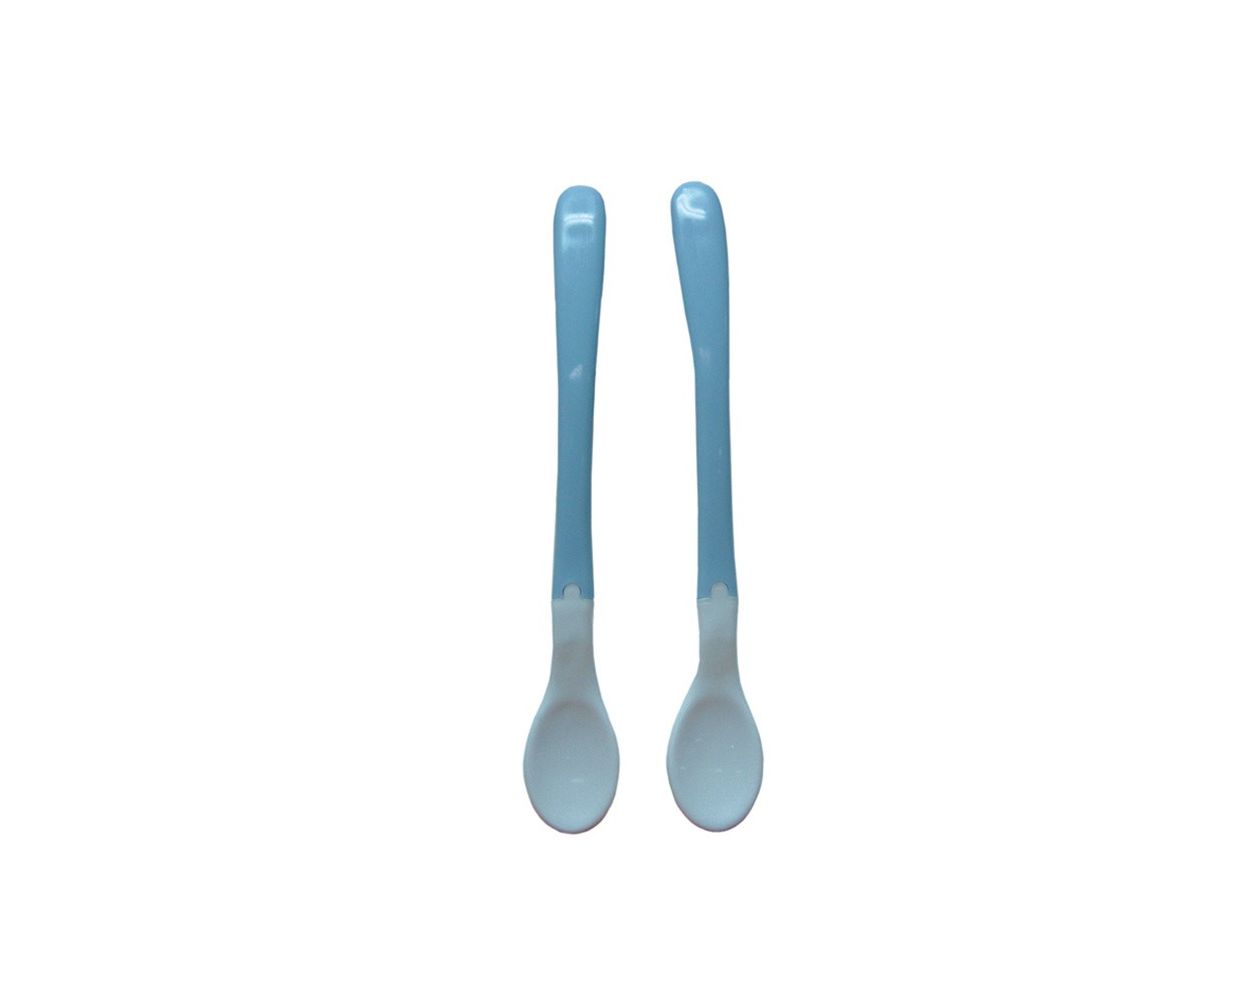 Dreambaby F501 First Stage Spoons (2pk)